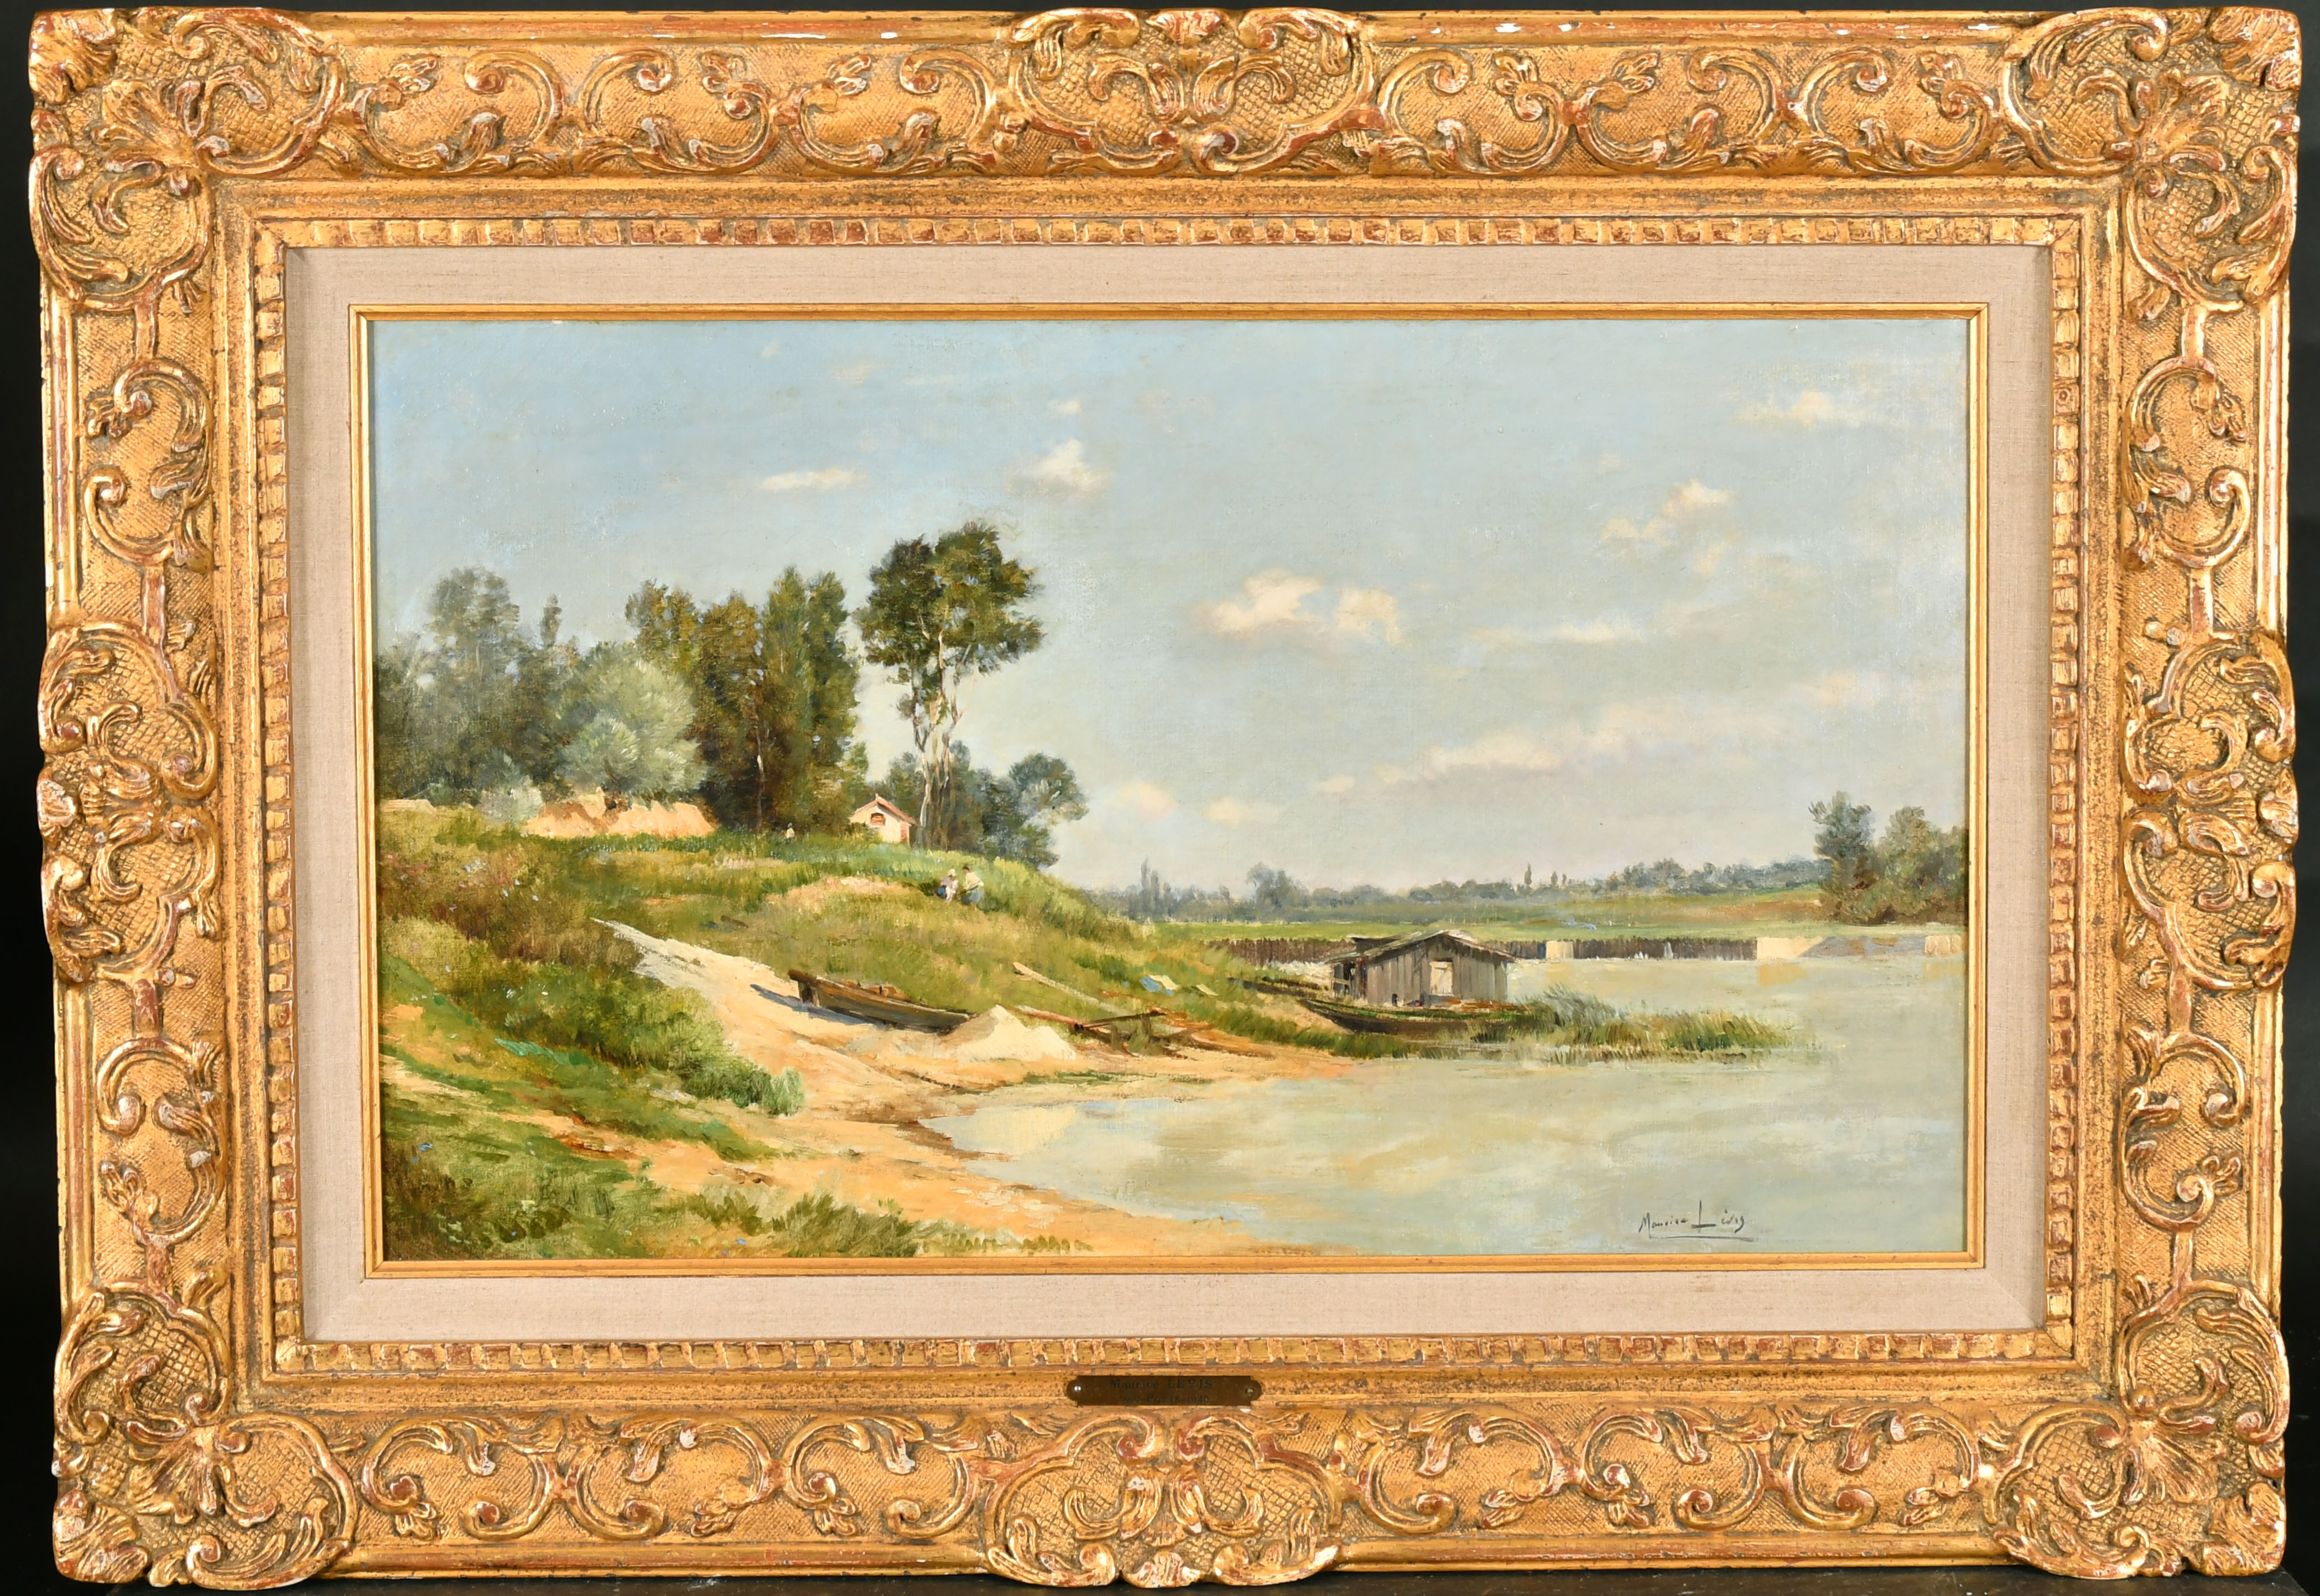 Maurice Levis (1860-1940) French. A River Scene, Oil on Canvas, Signed, 13" x 21.75" (33 x 55.3cm) - Image 2 of 5